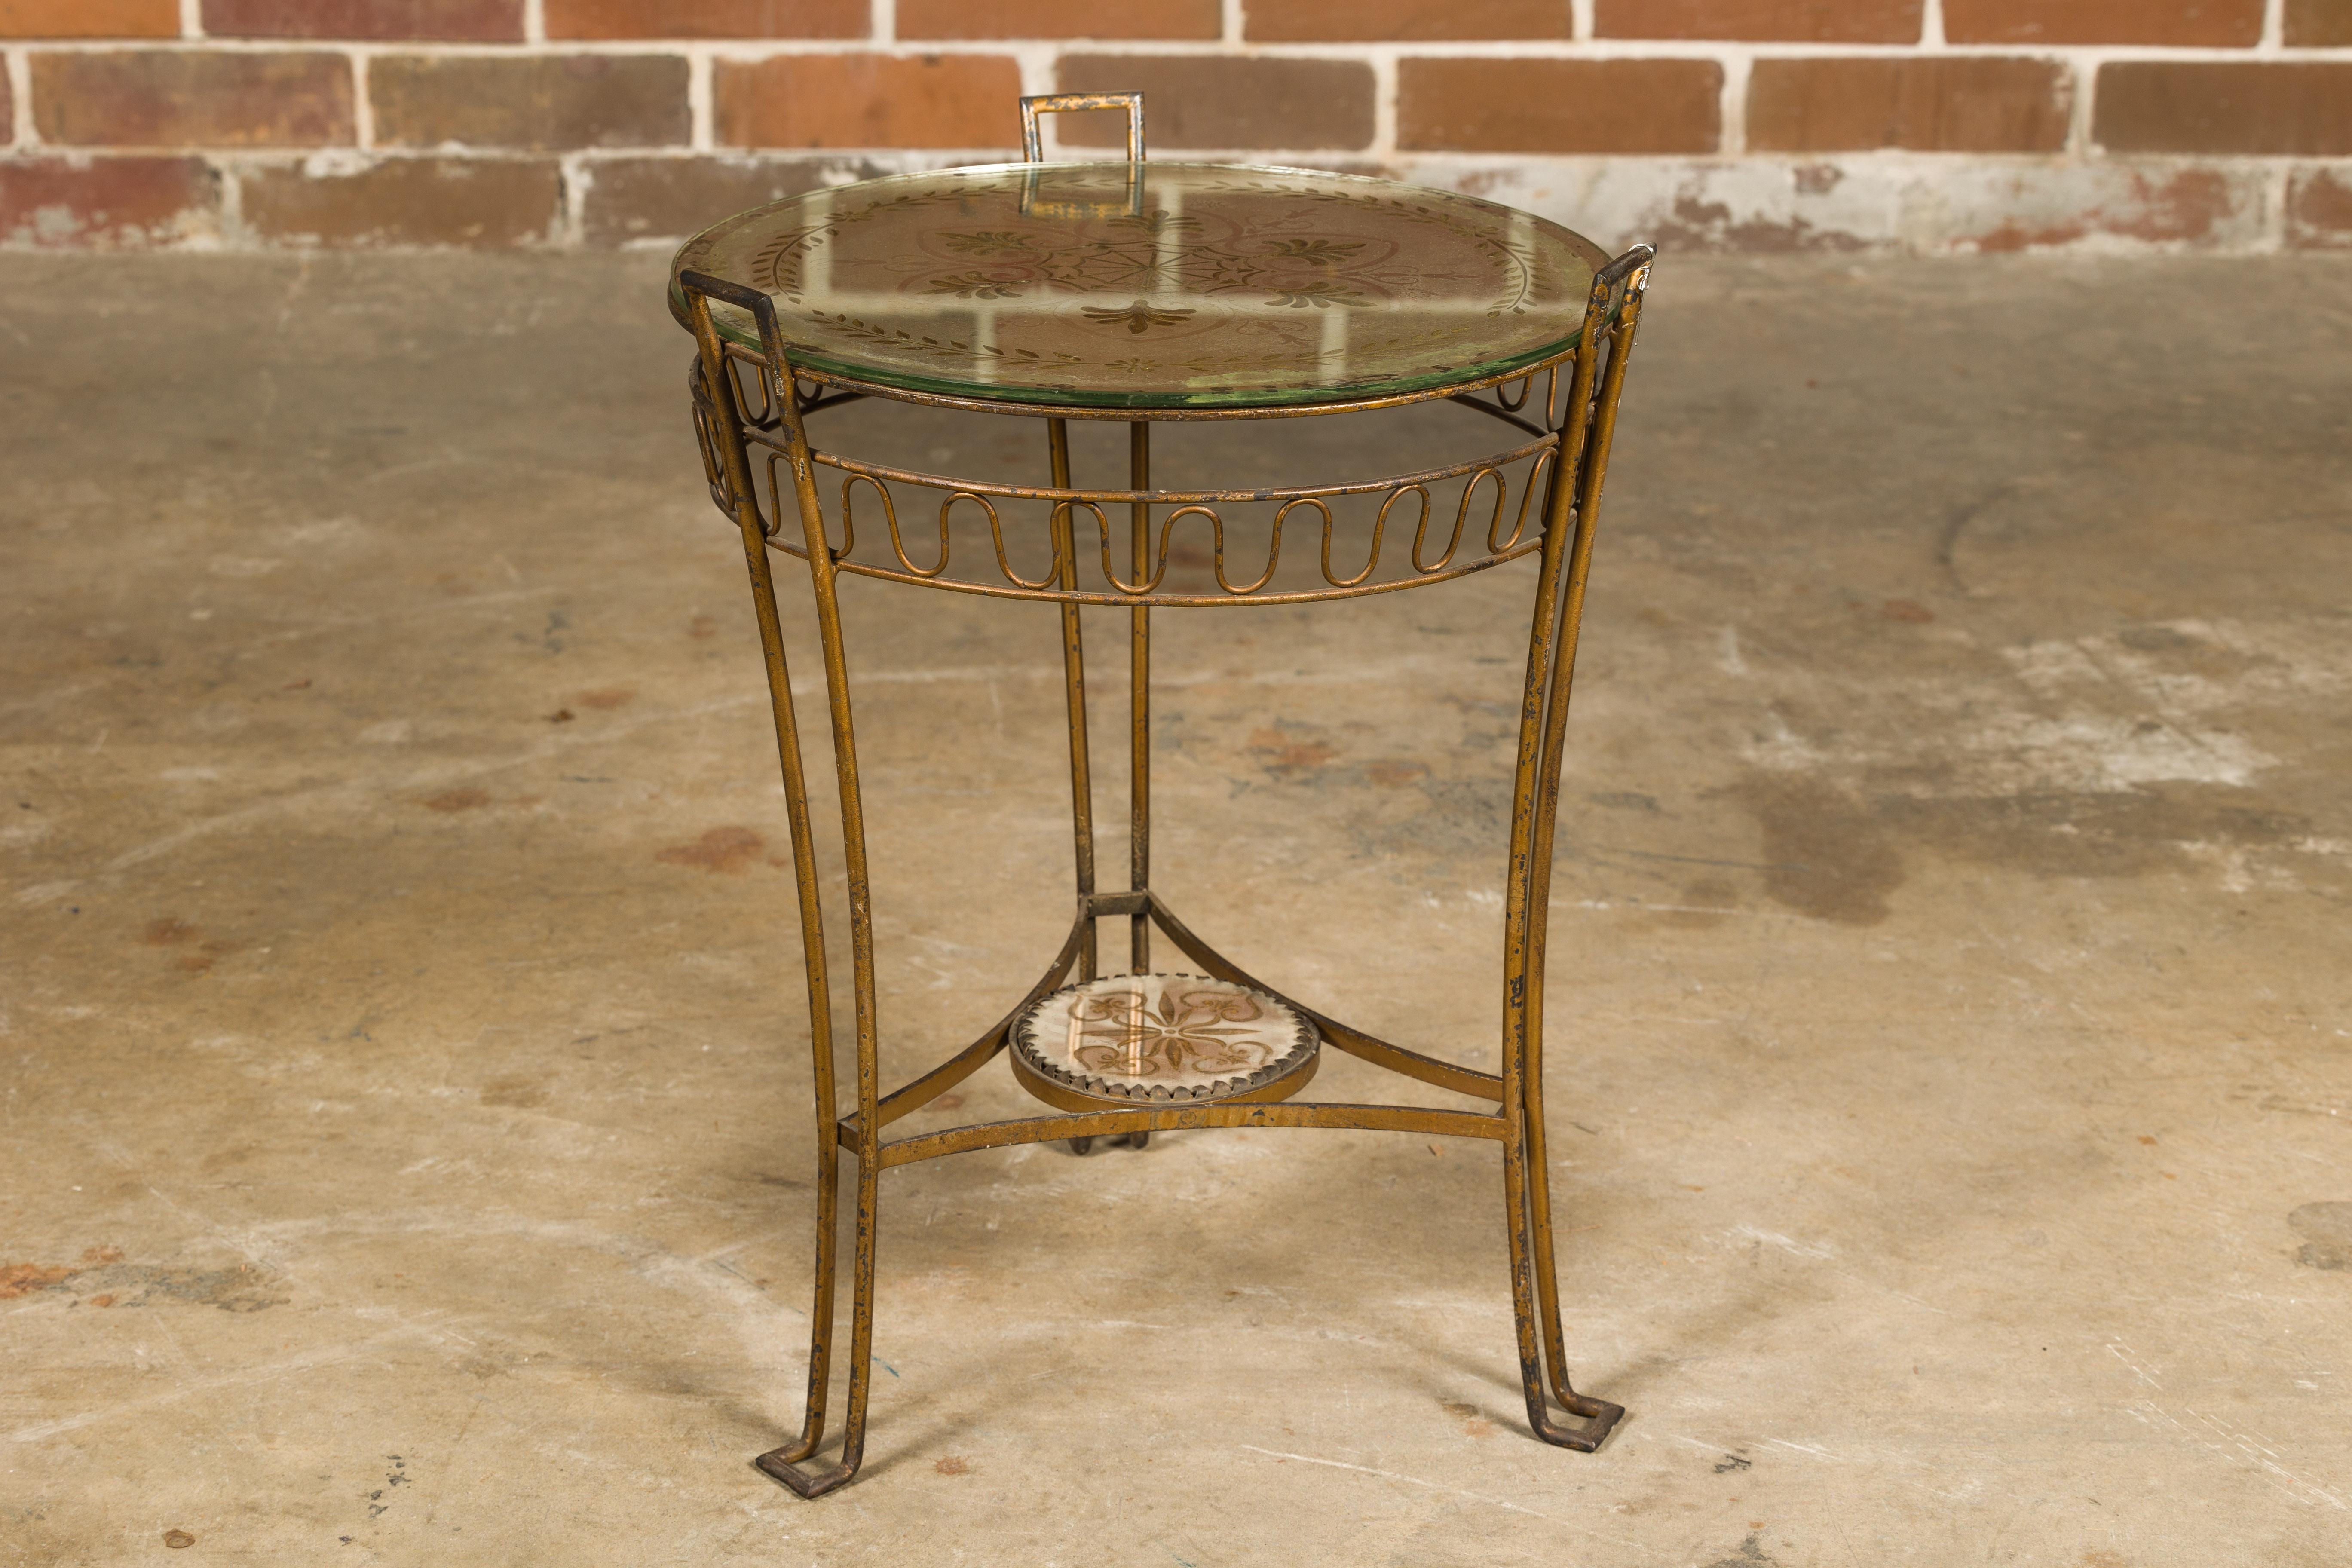 20th Century French 1920s Gilt Iron Side Table with Etched Foliage Mirrored Top and Low Shelf For Sale